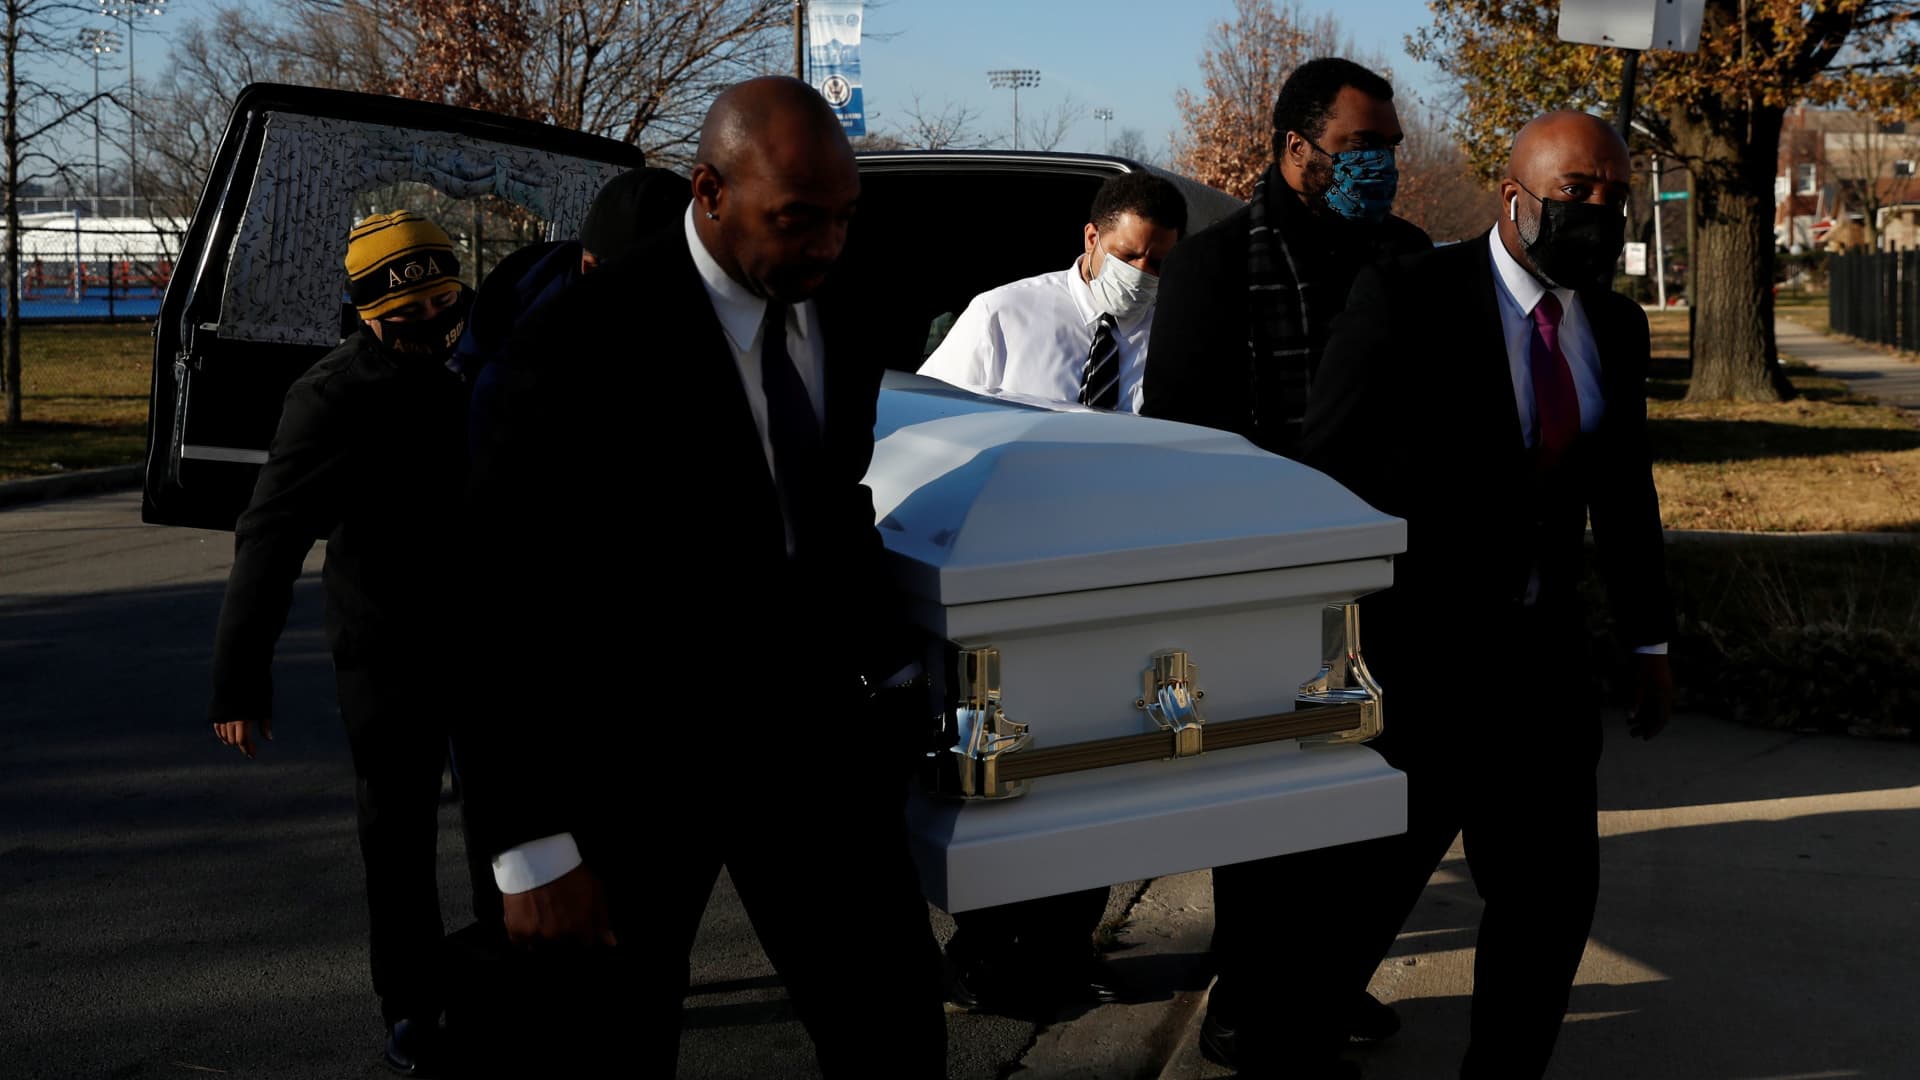 Sammie Michael Dent, Jr., the grandson of Florence Bolton, a coronavirus disease (COVID-19) positive patient that died on November 2nd at Roseland Community Hospital, carries her casket into Zion Evangelical Lutheran Church on the South Side of Chicago, Illinois, U.S., December 9, 2020.